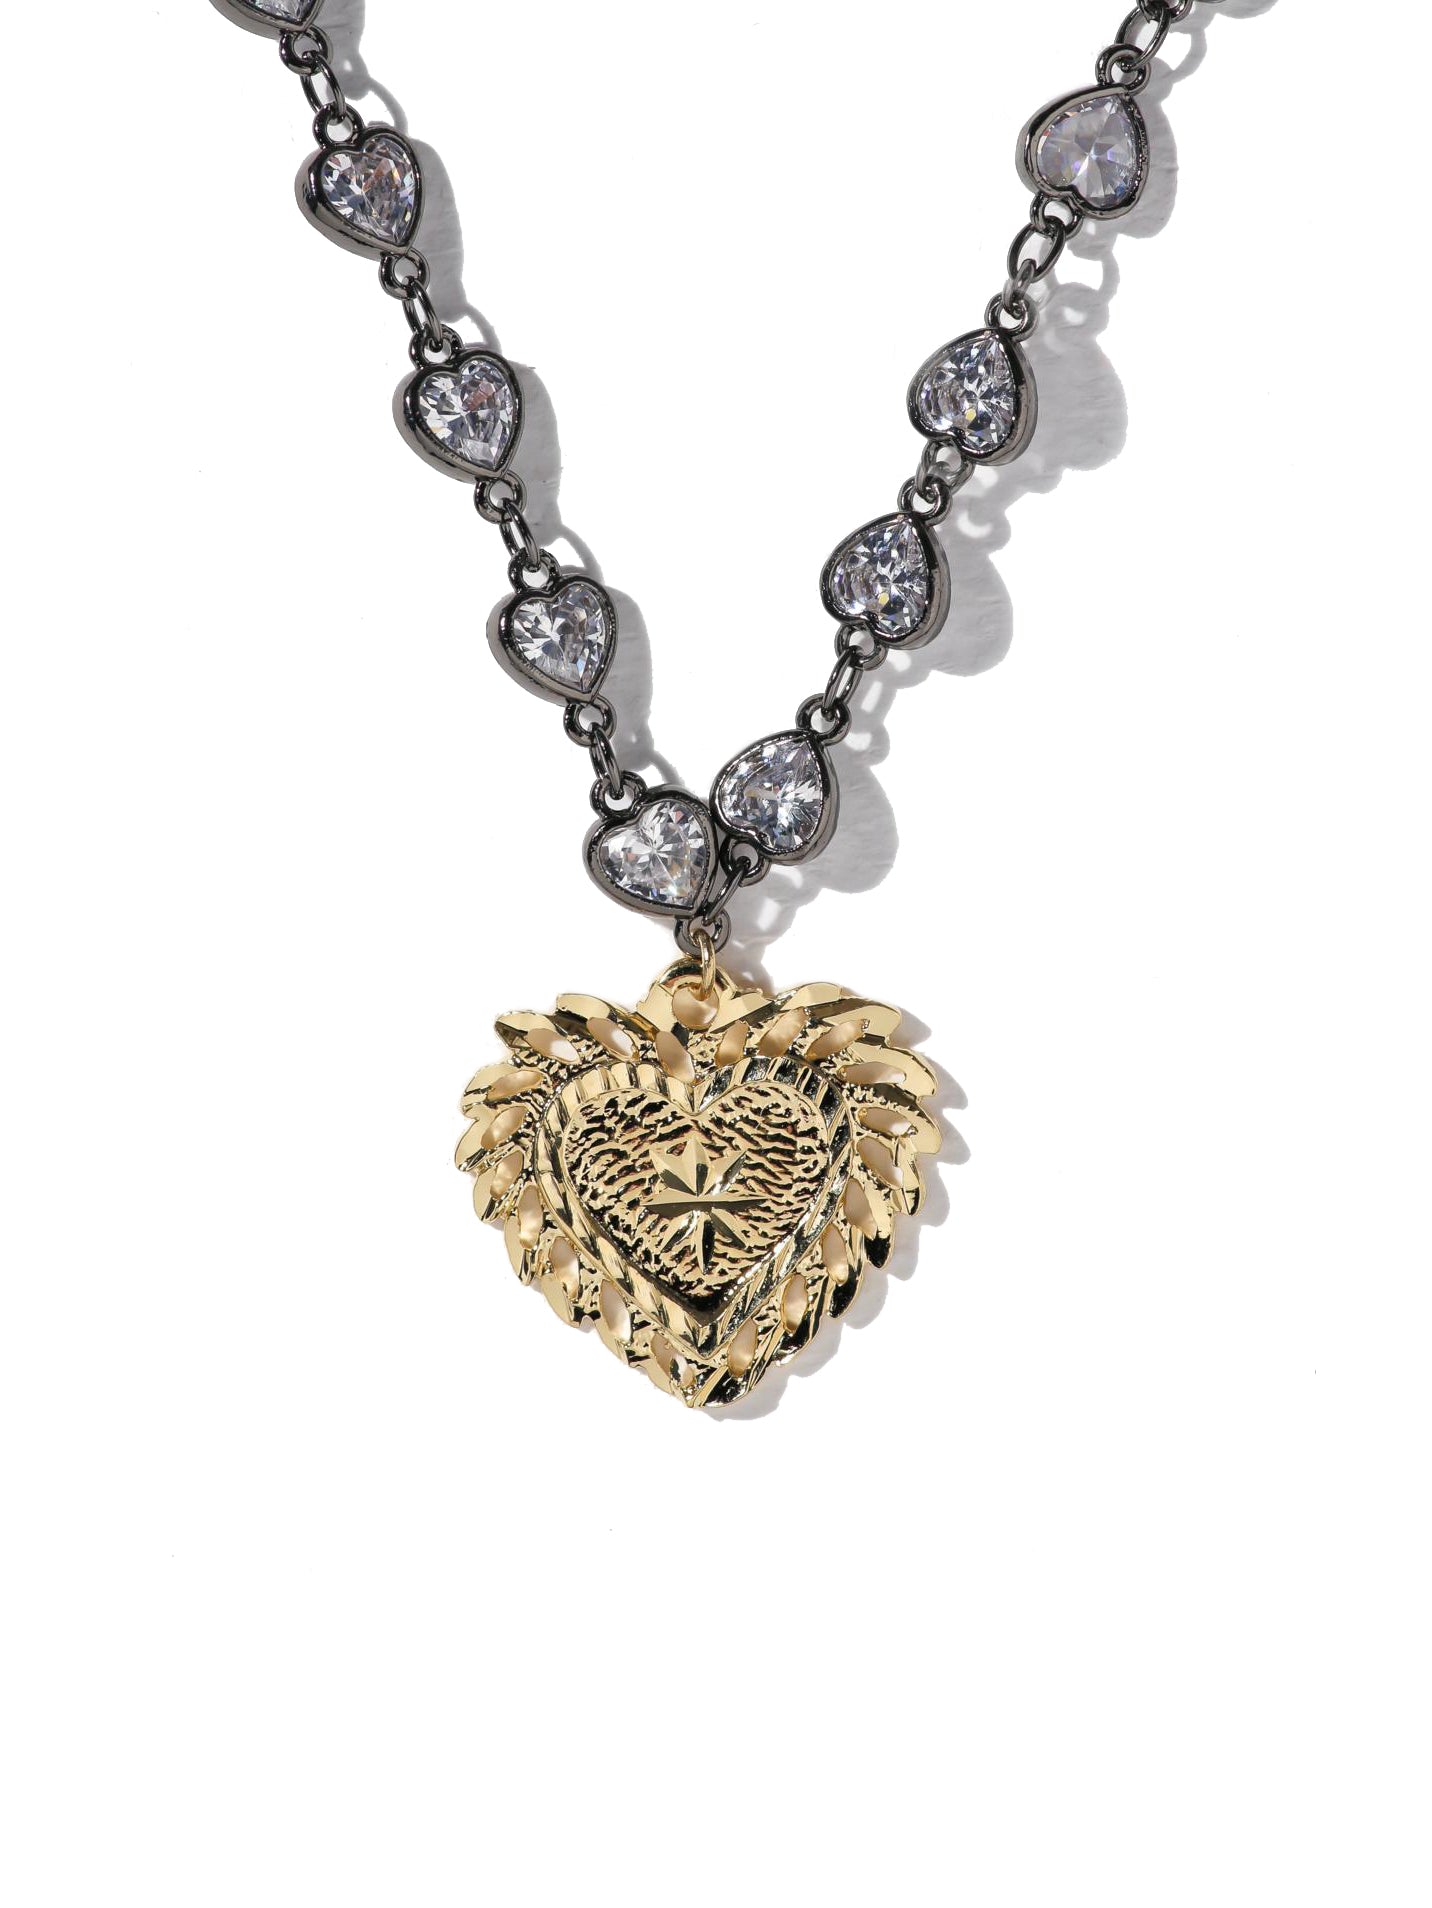 The Crystal Heart Necklace